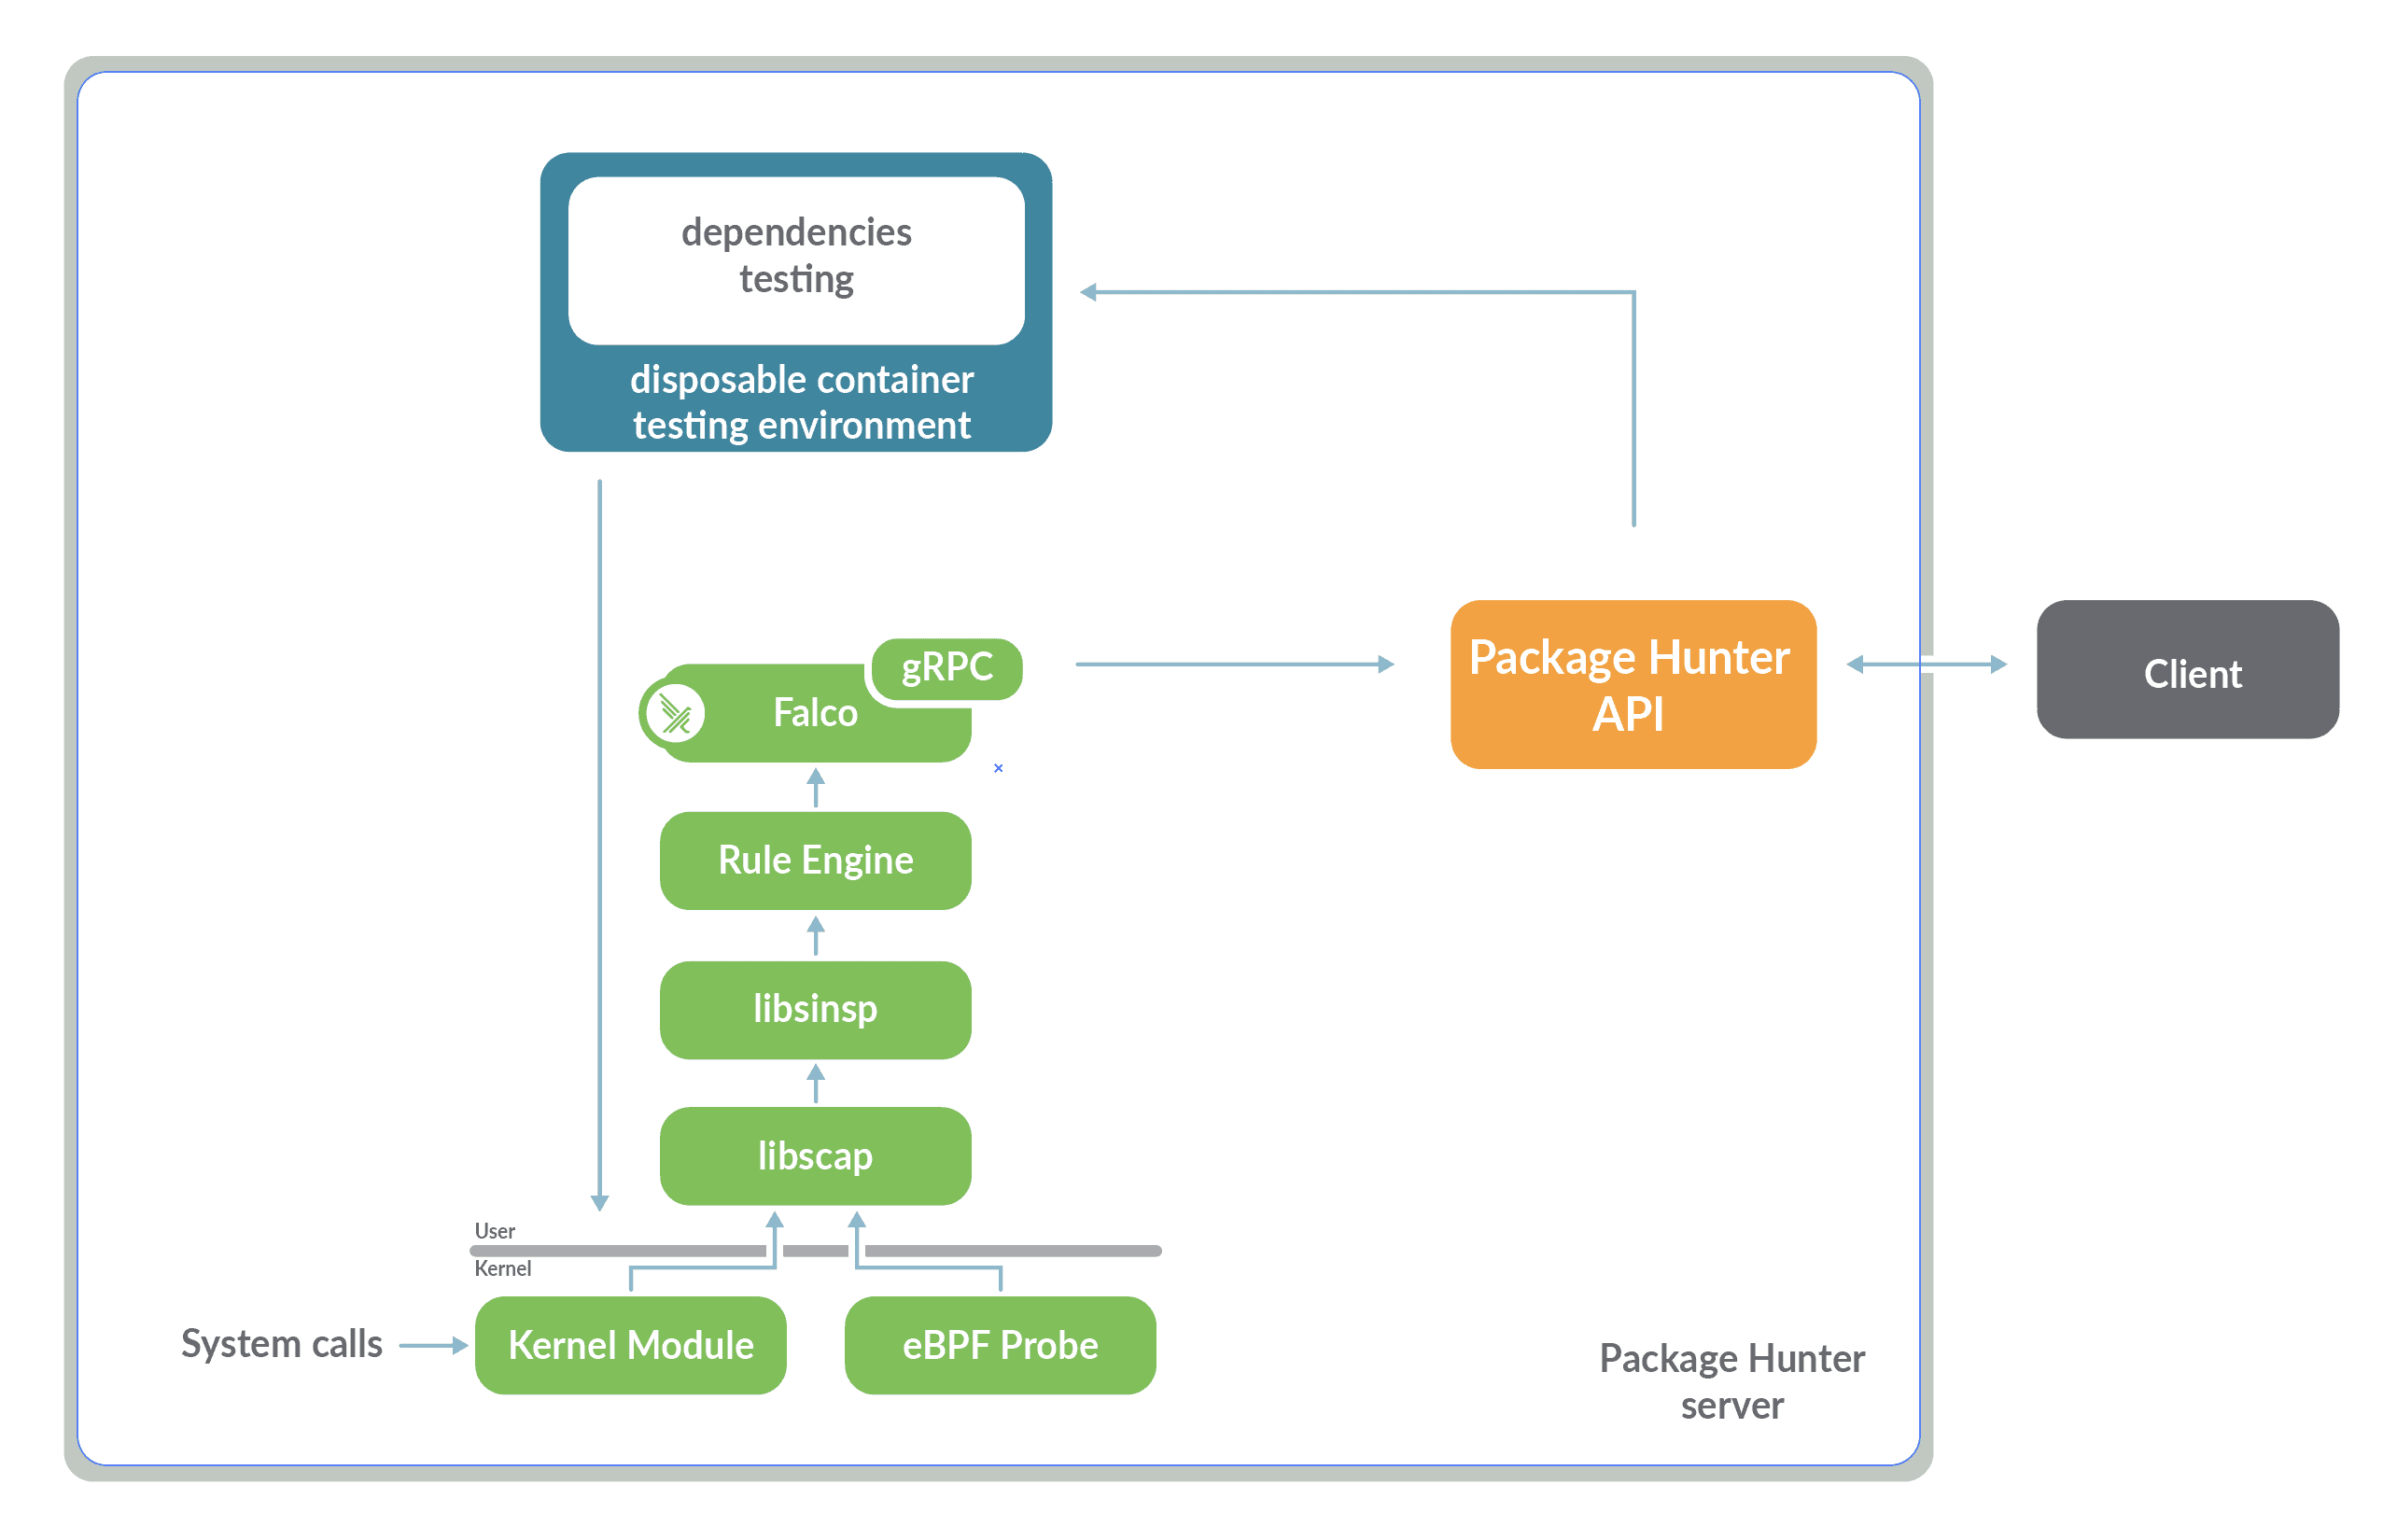 Diagram showing how Package Hunter interacts with Falco through gRPC